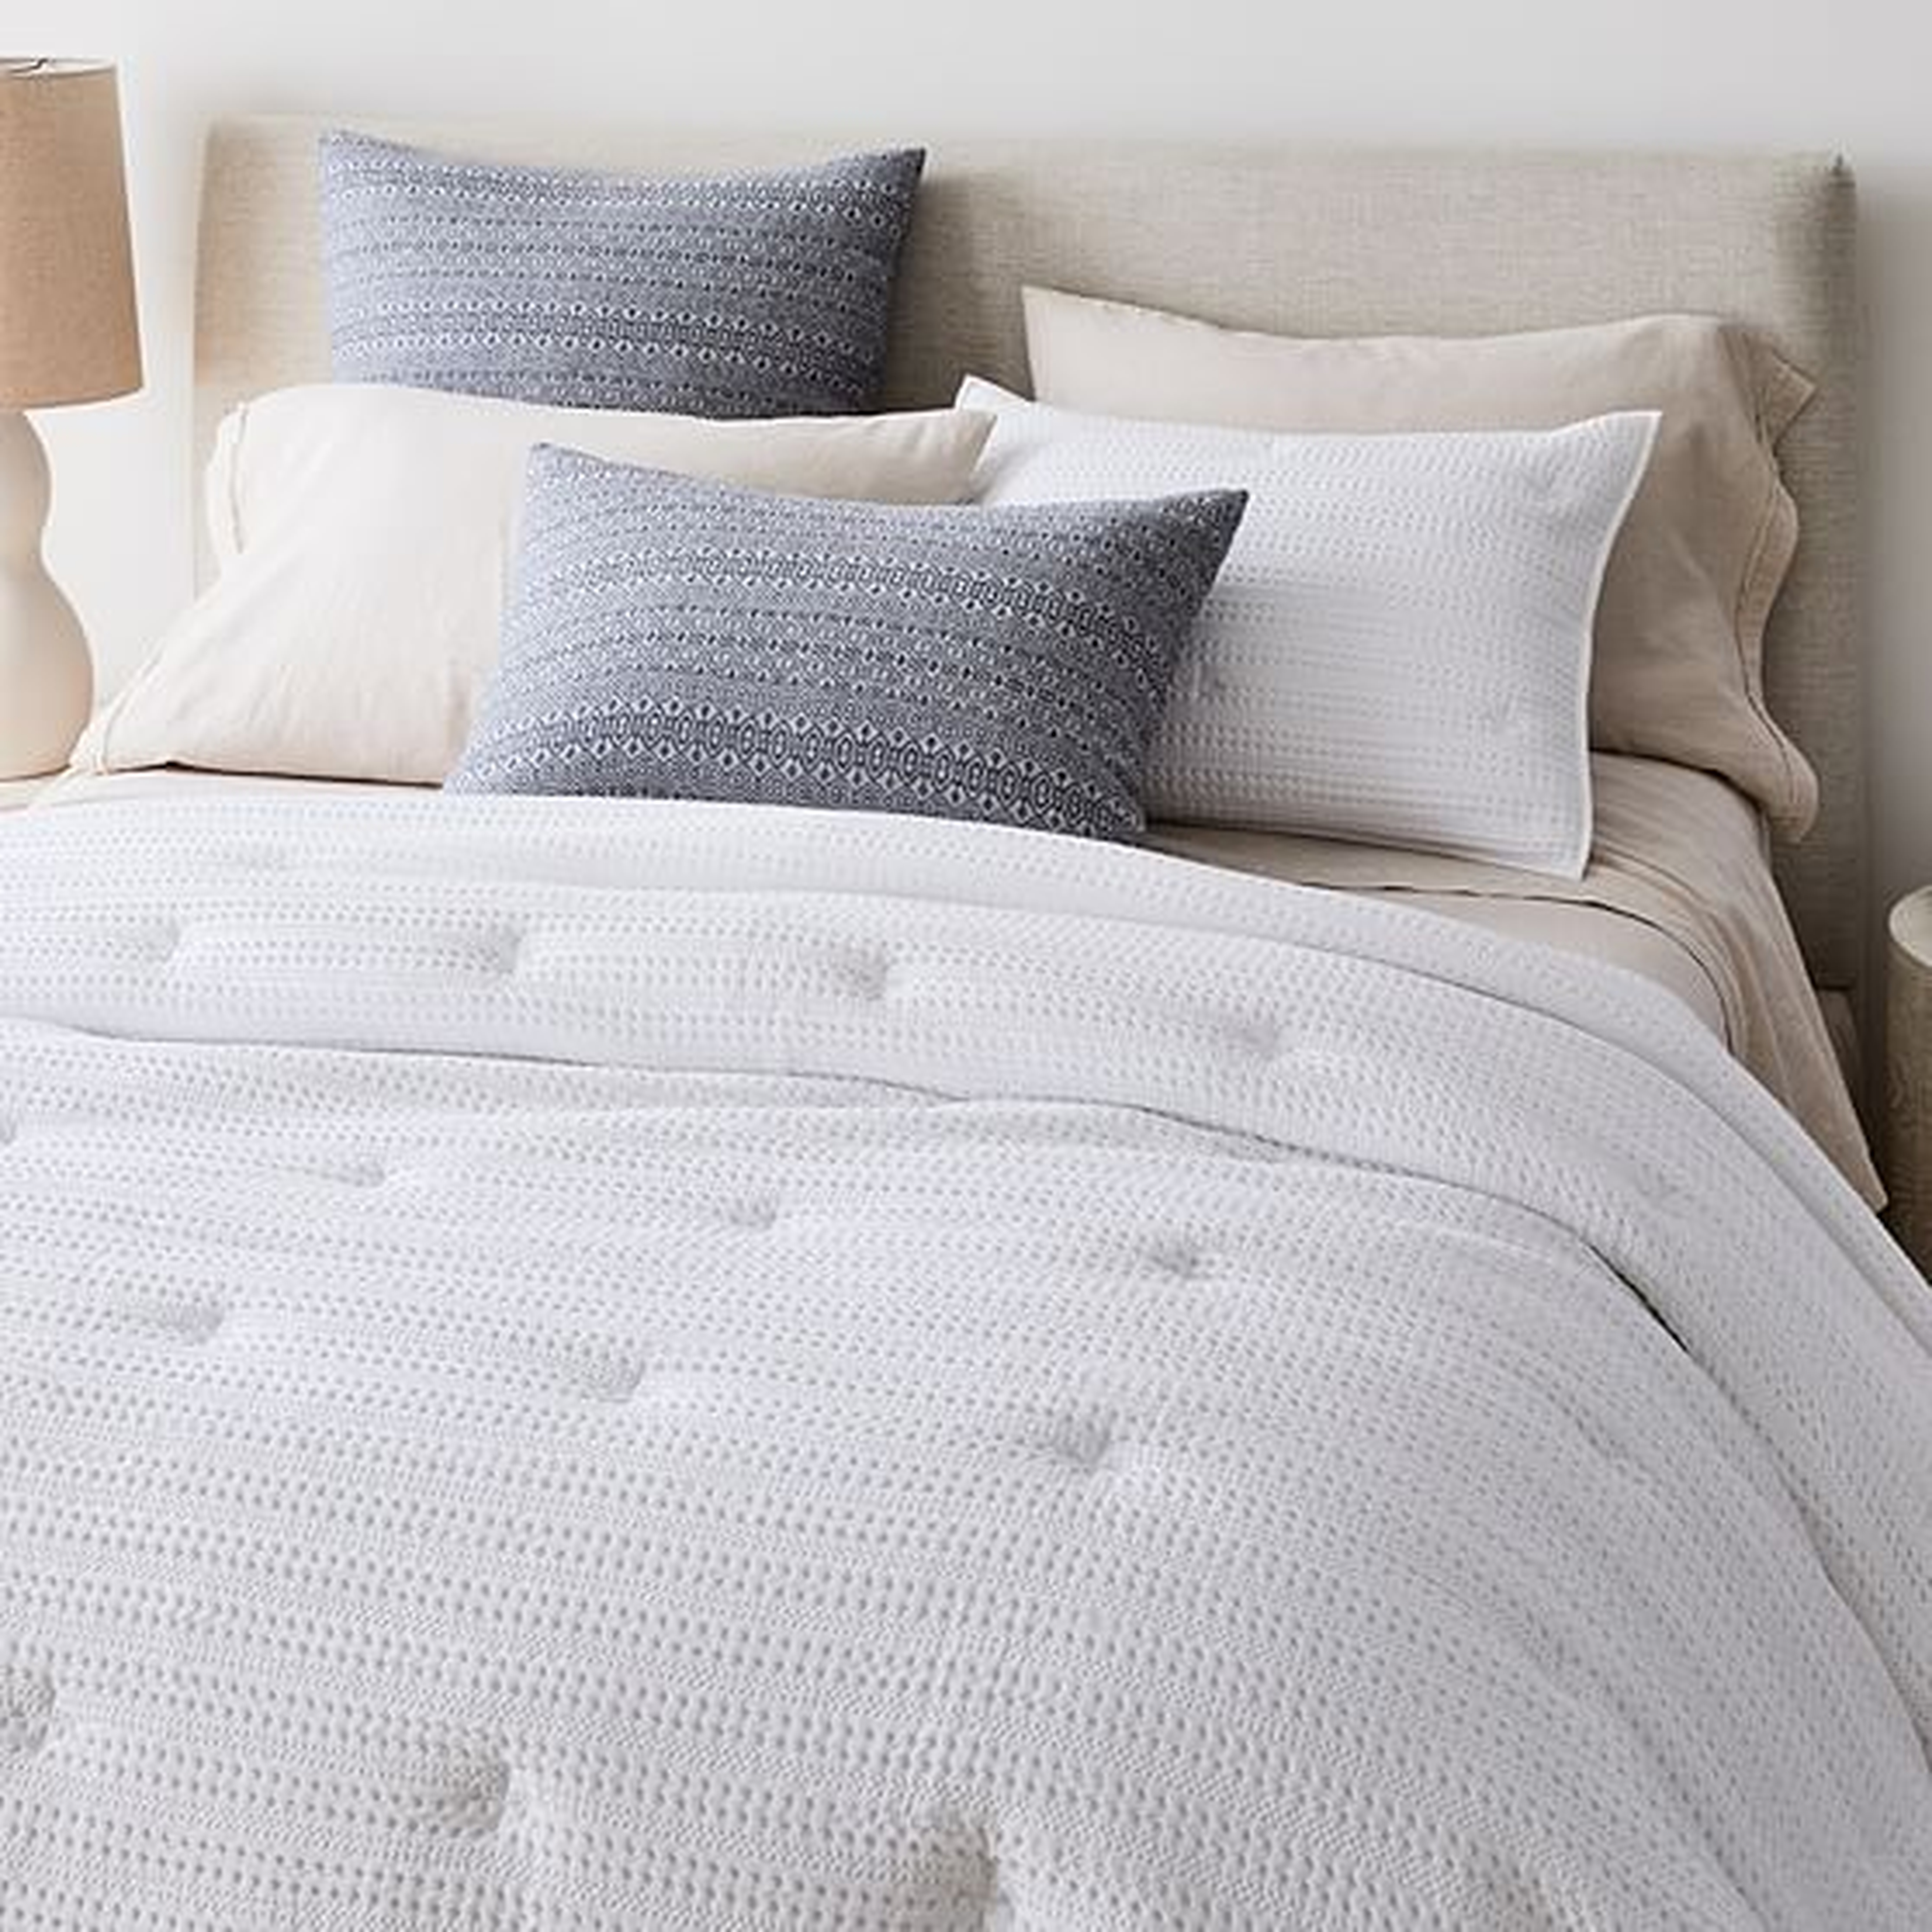 Organic Textured Waffle Quilt, Full/Queen, White - West Elm